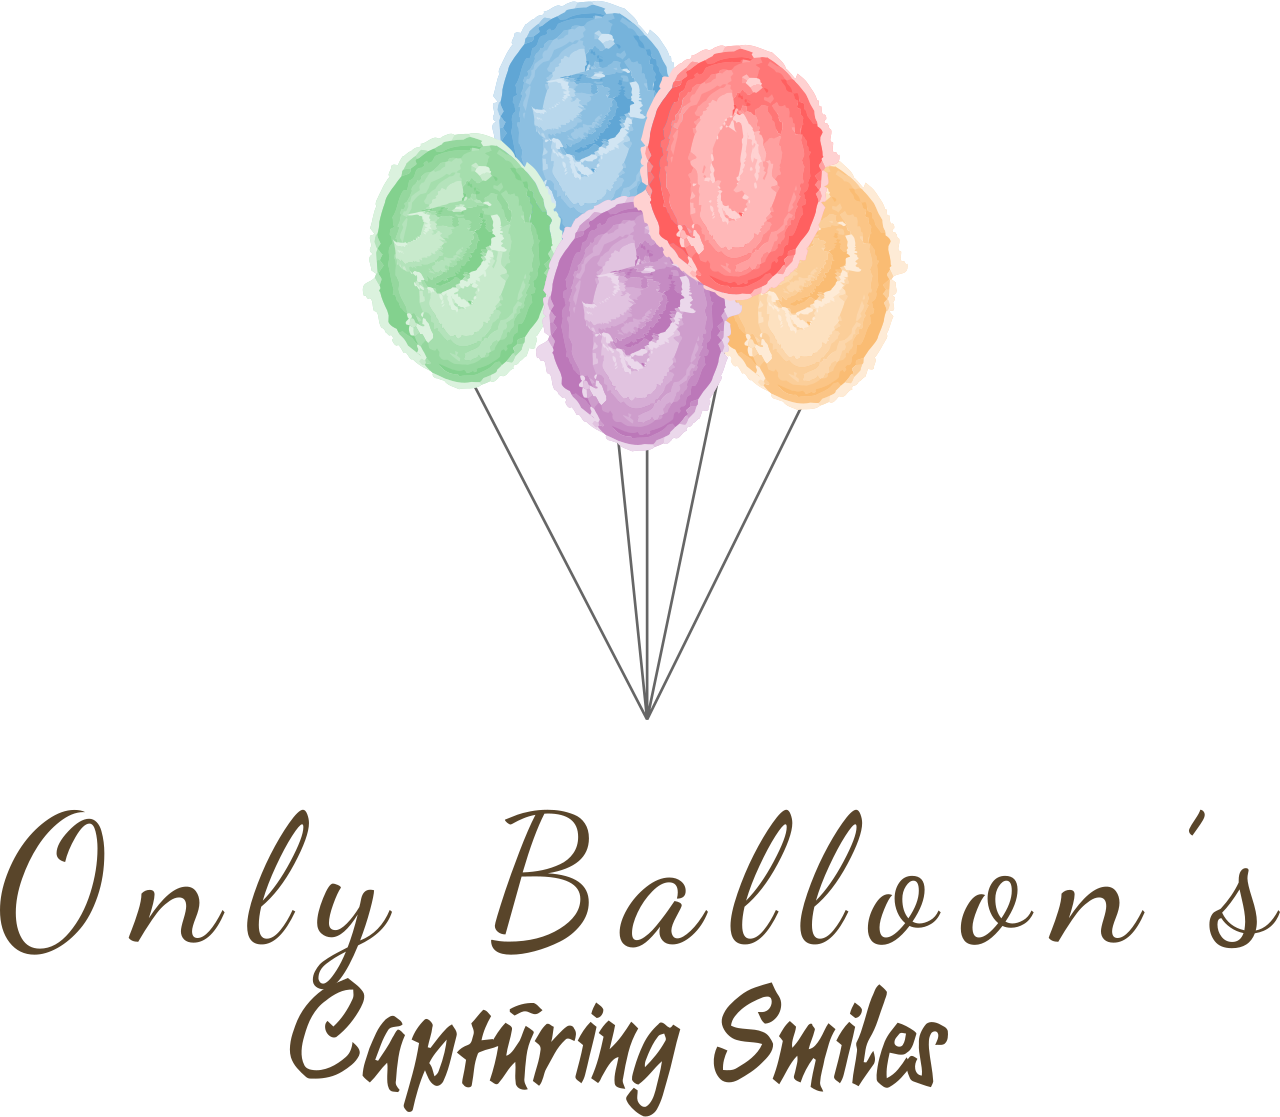 Only Balloon’s's web page